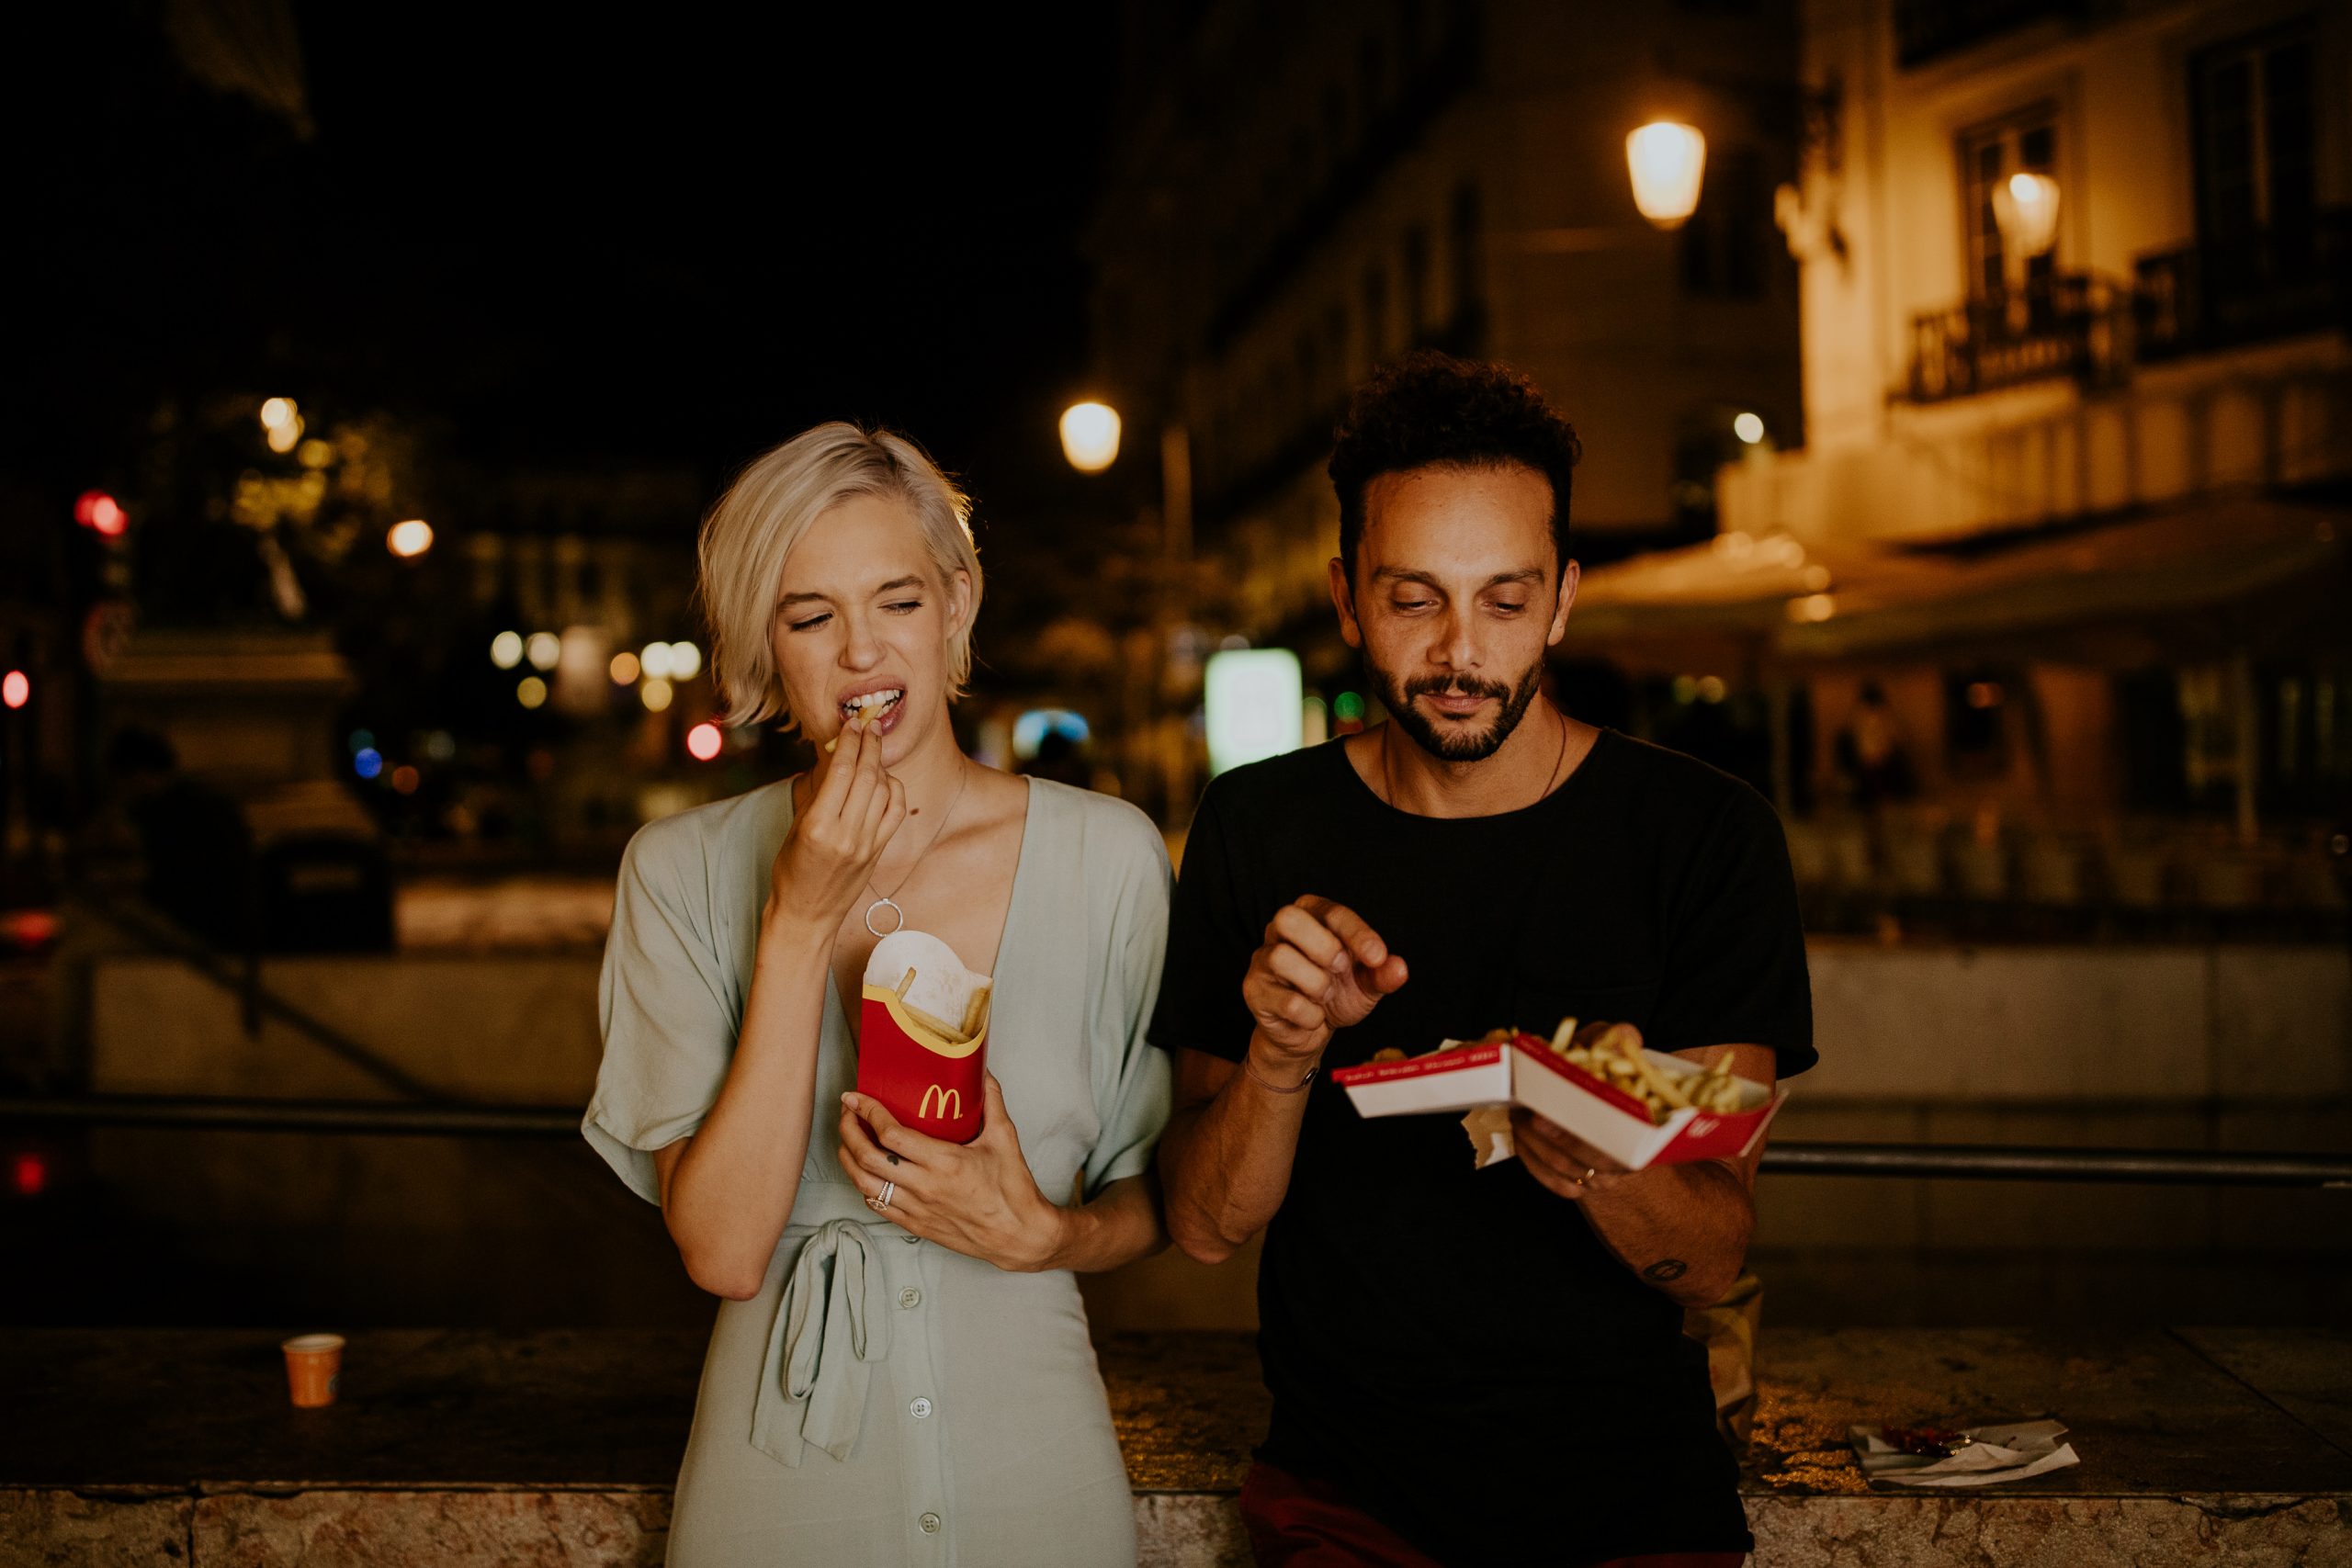 boy and girl at night eating mcdonalds french fries